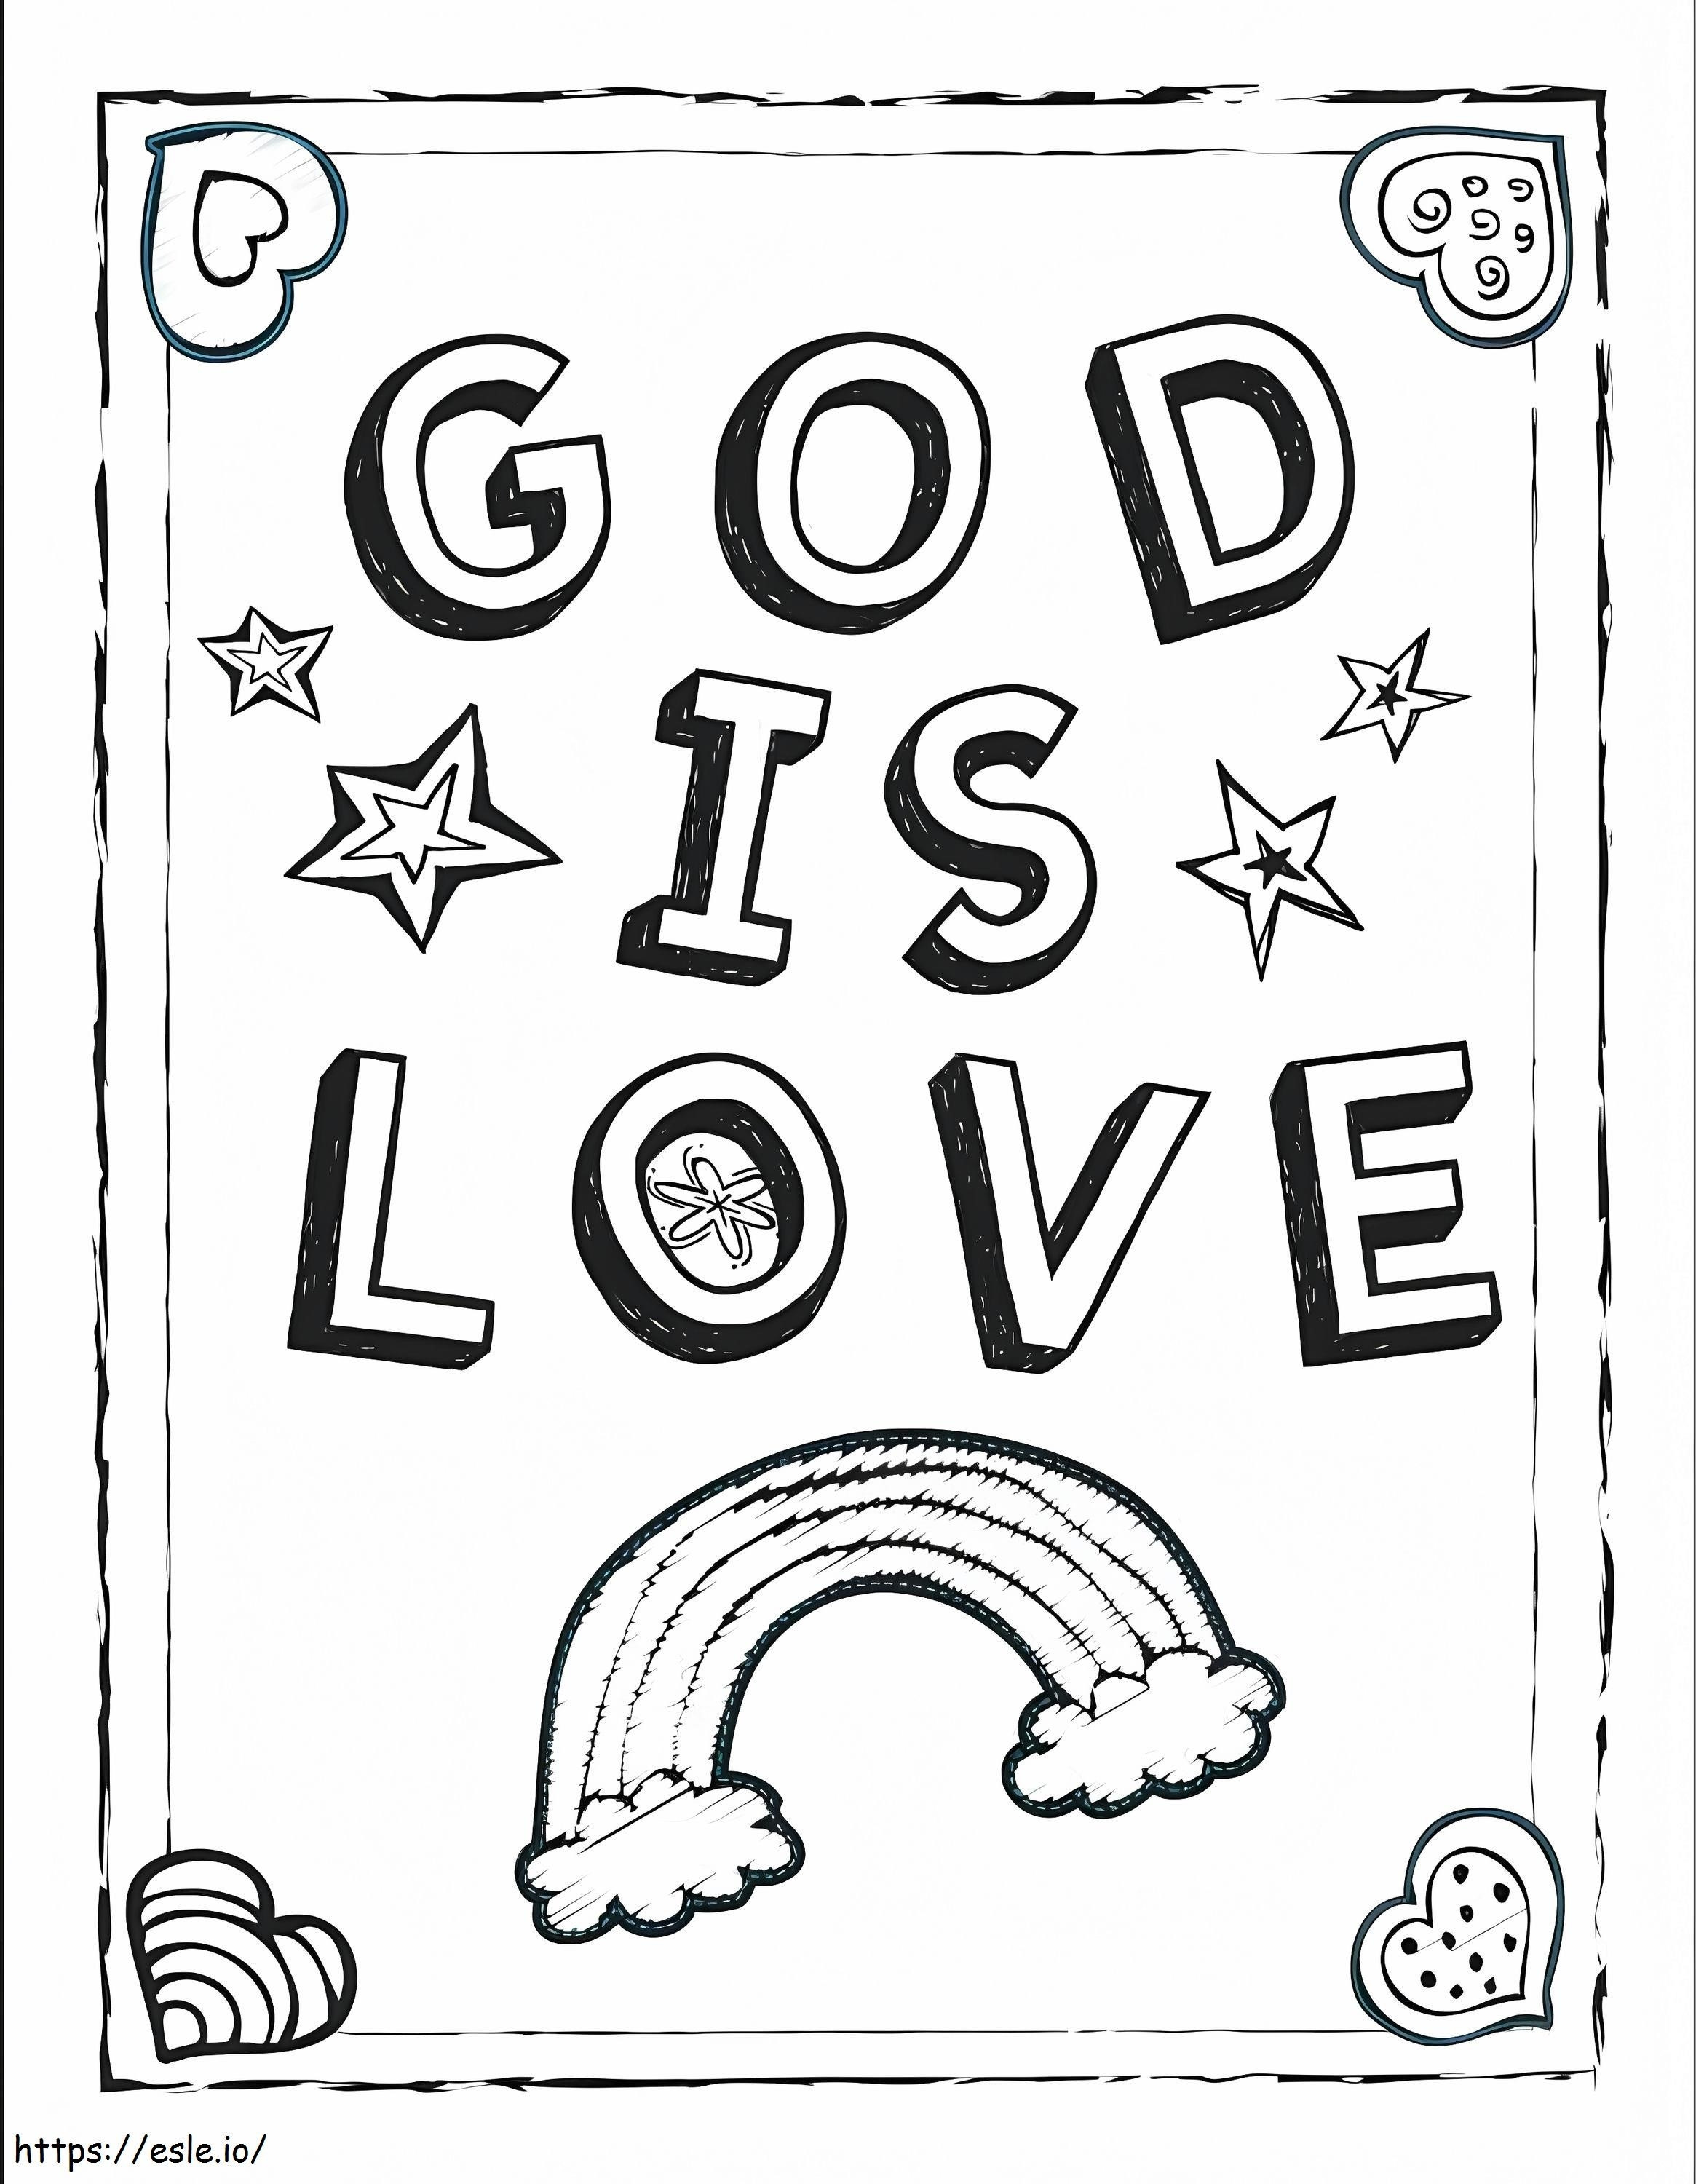 God Is Love coloring page